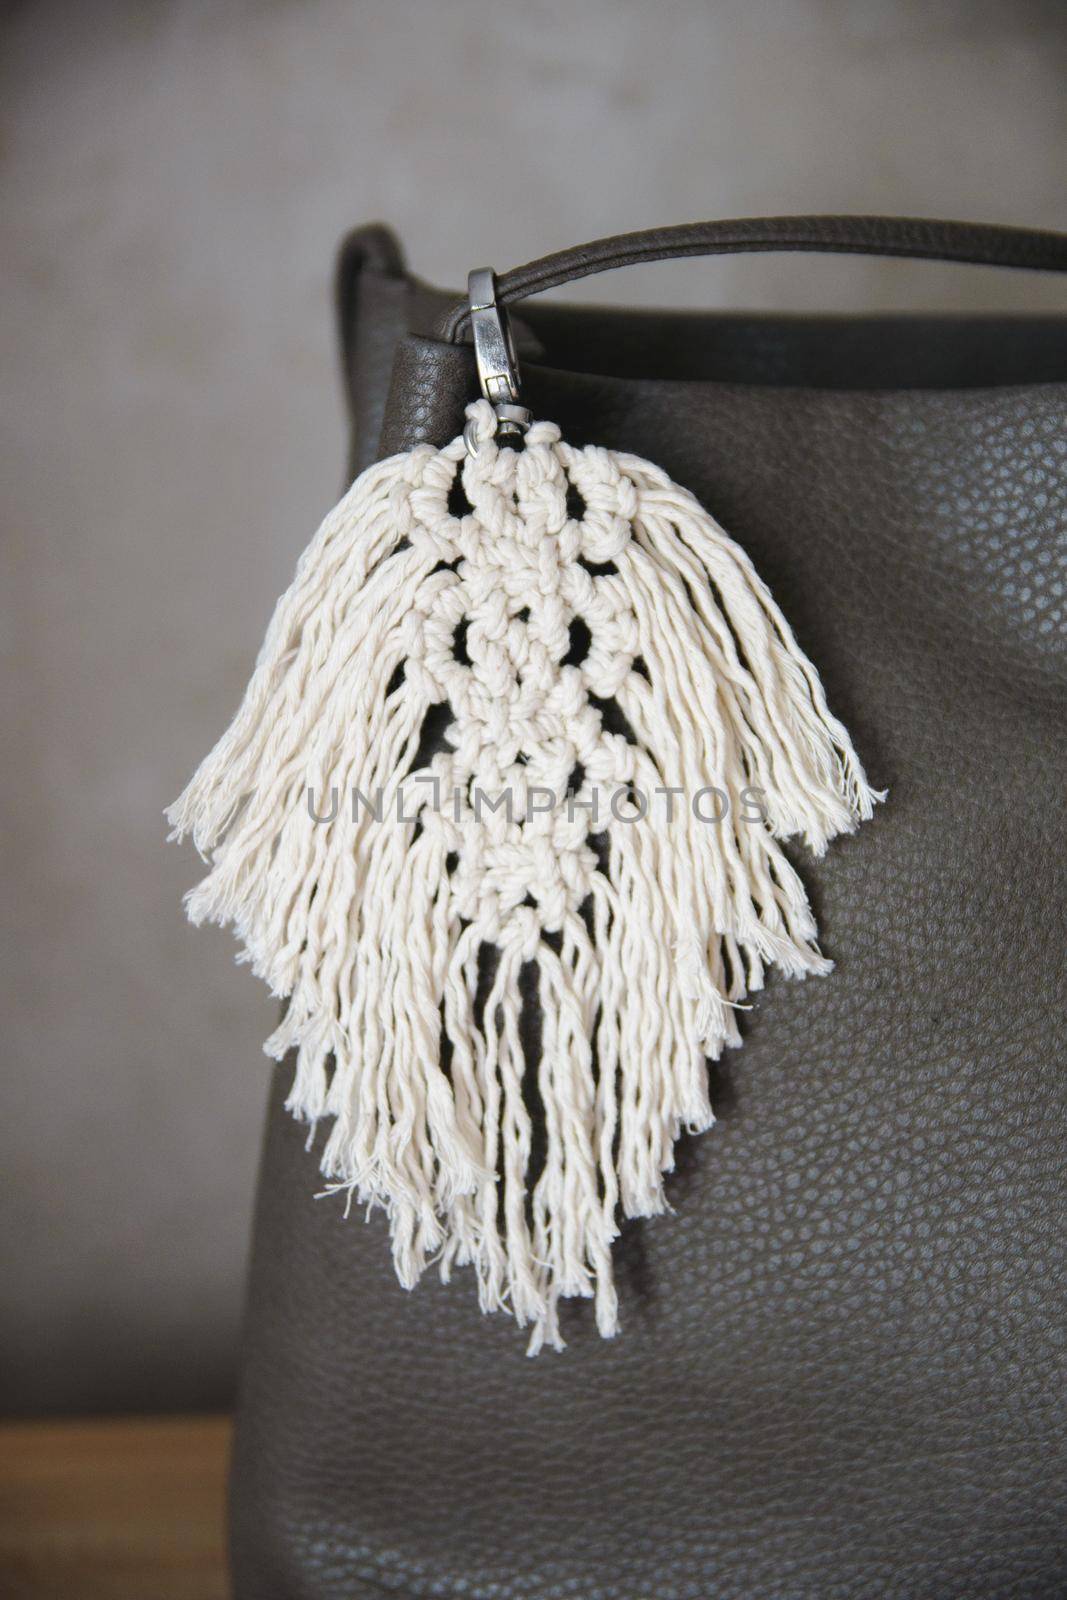 Handmade macrame keychains are made of natural cotton thread and attached to the clasp.
They are perfect for keys, bags or wallets!are made of natural cotton thread and attached to the clasp.
They are perfect for keys, bags or wallets!